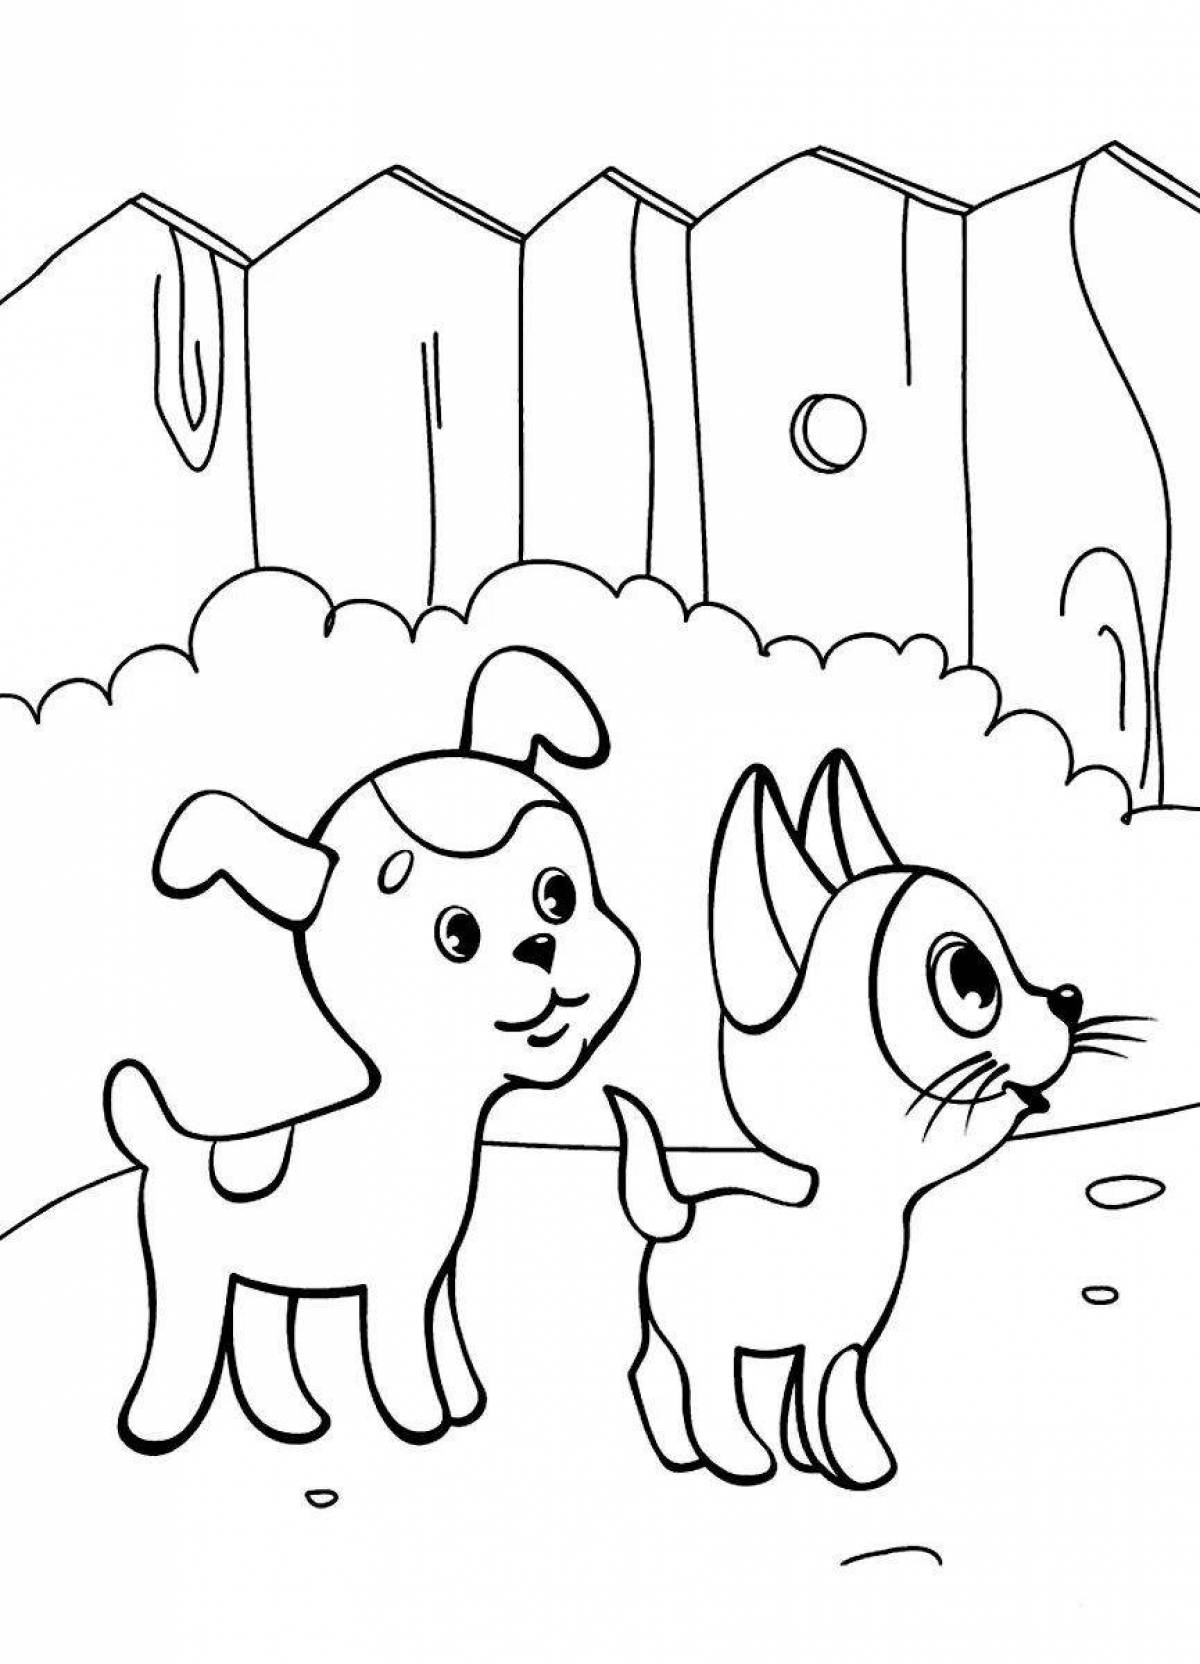 Relaxed cat and puppy coloring book